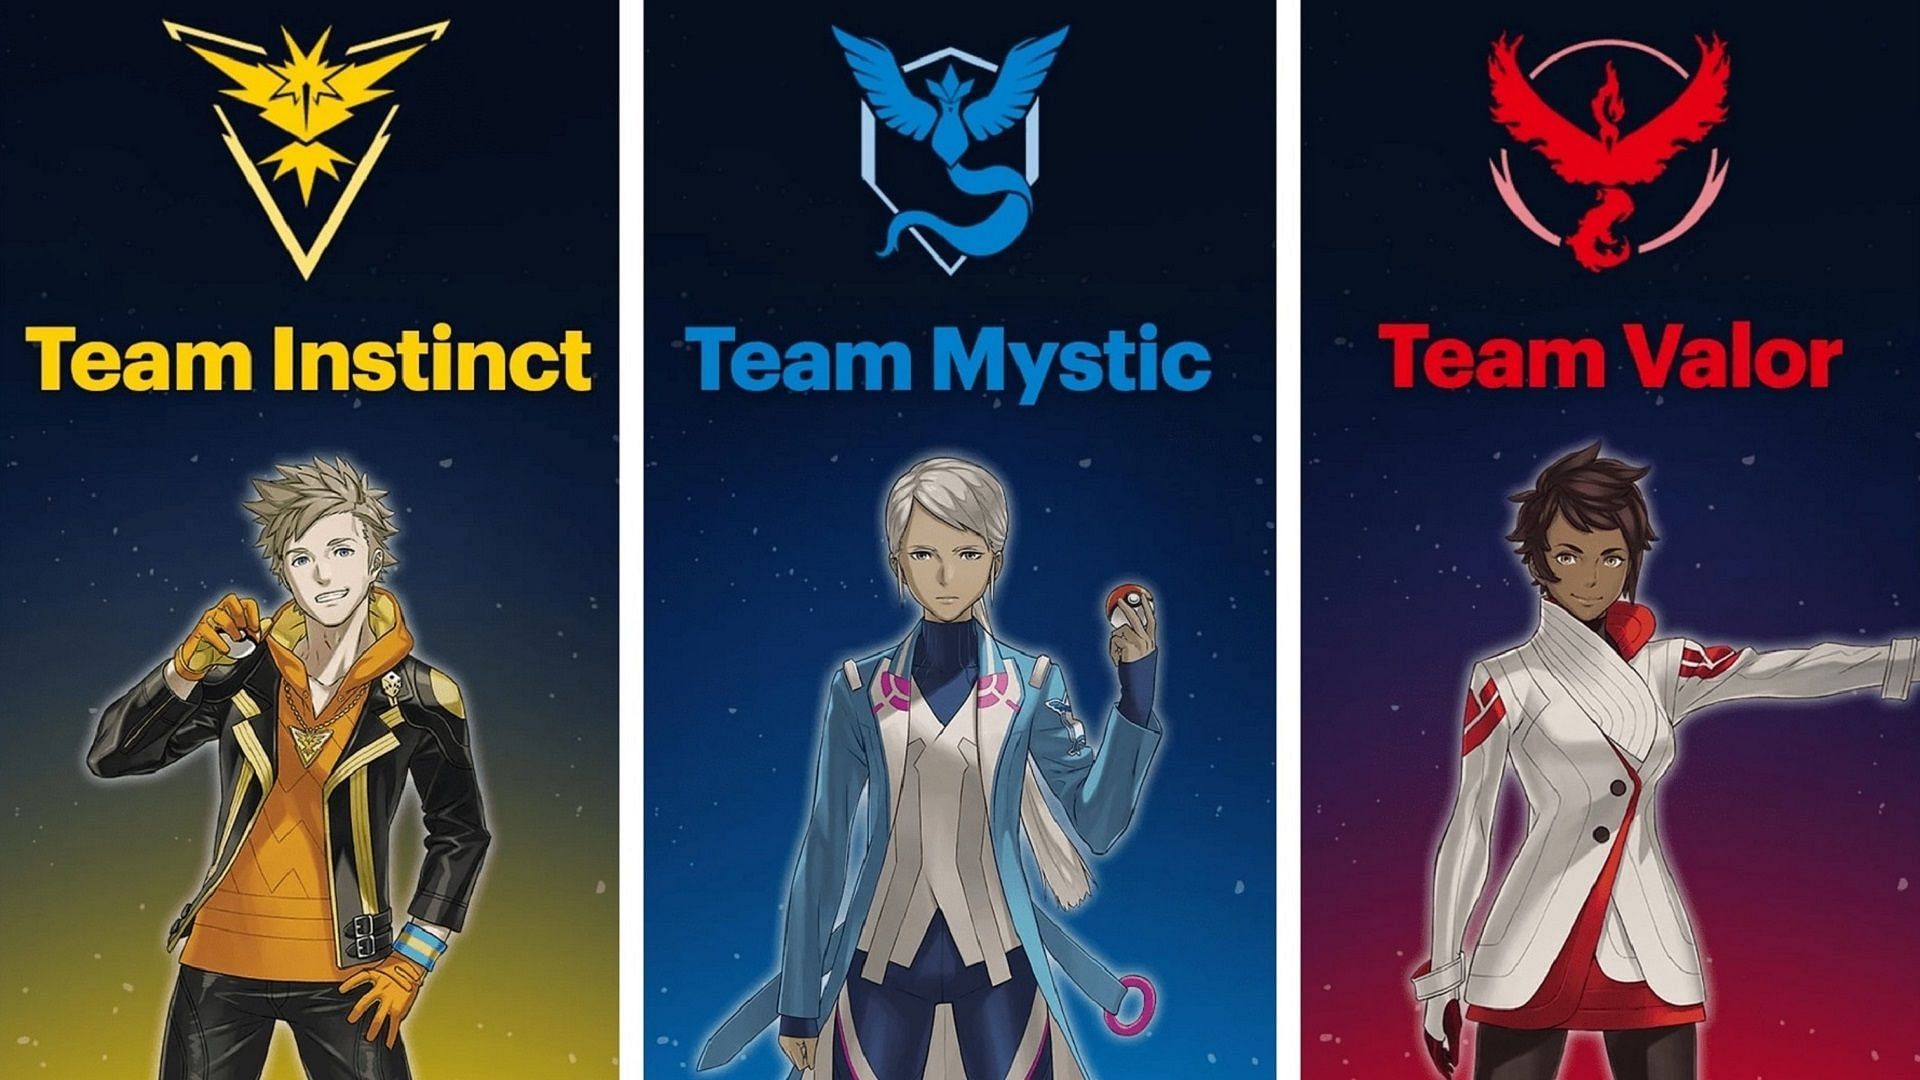 Teams Instinct, Mystic, and Valor, and their leaders in Pokemon GO.